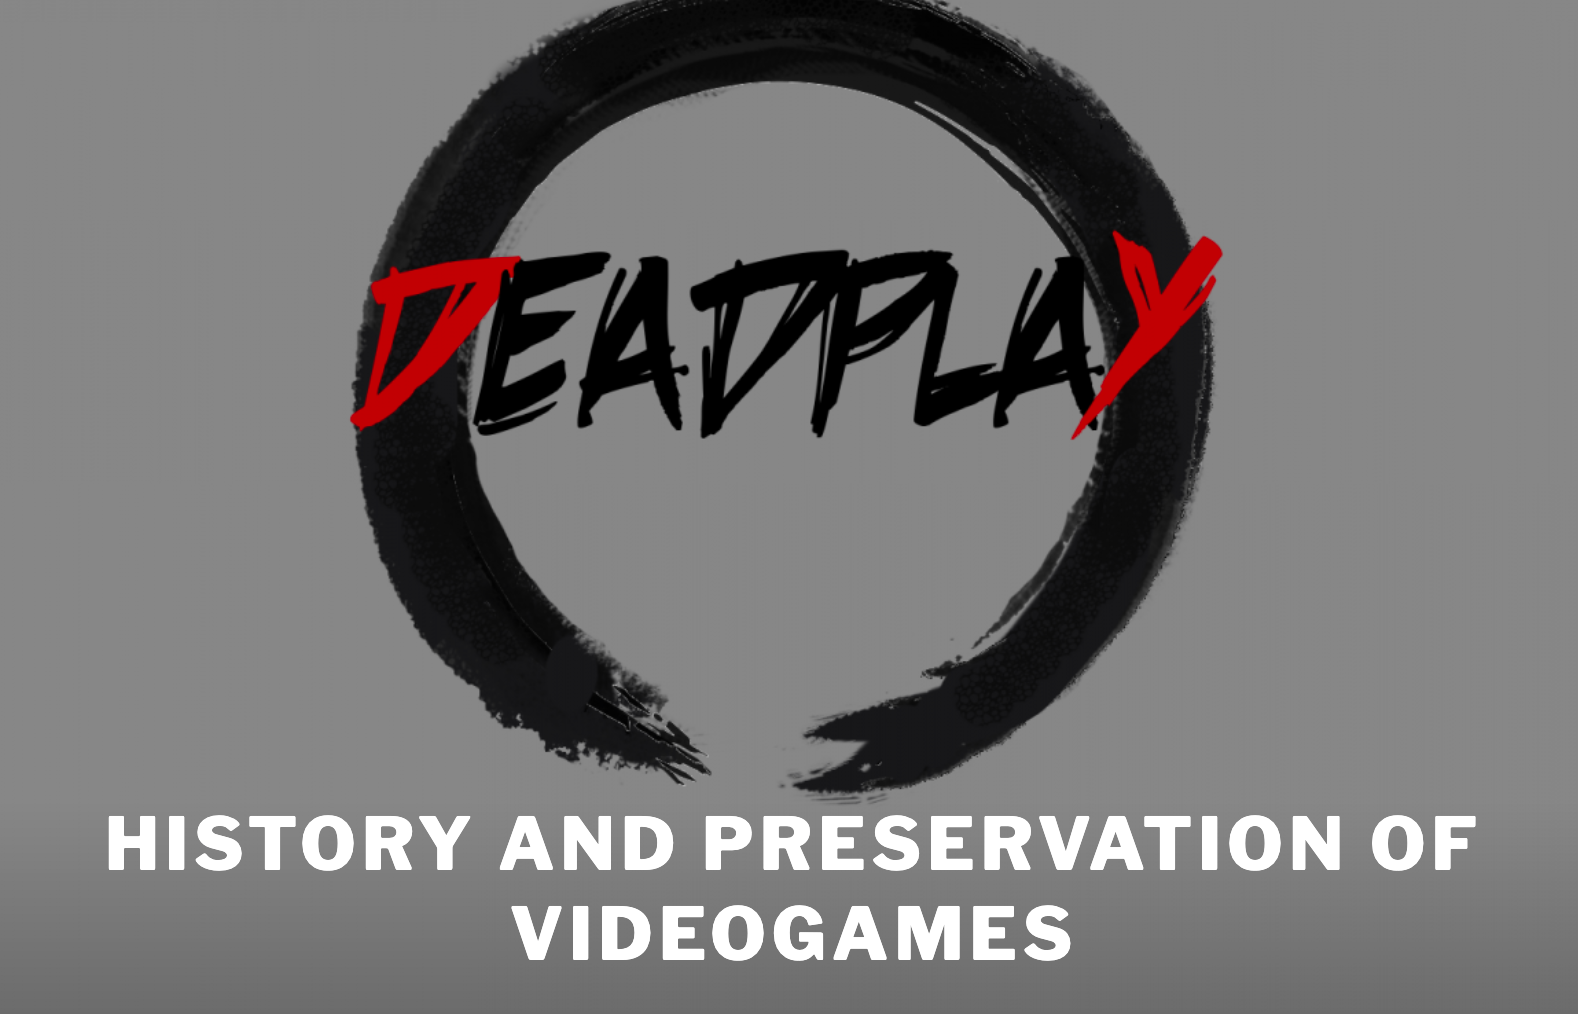 Deadplay: A Methodology for the Preservation and Study of Video Games as Cultural Heritage Artifacts